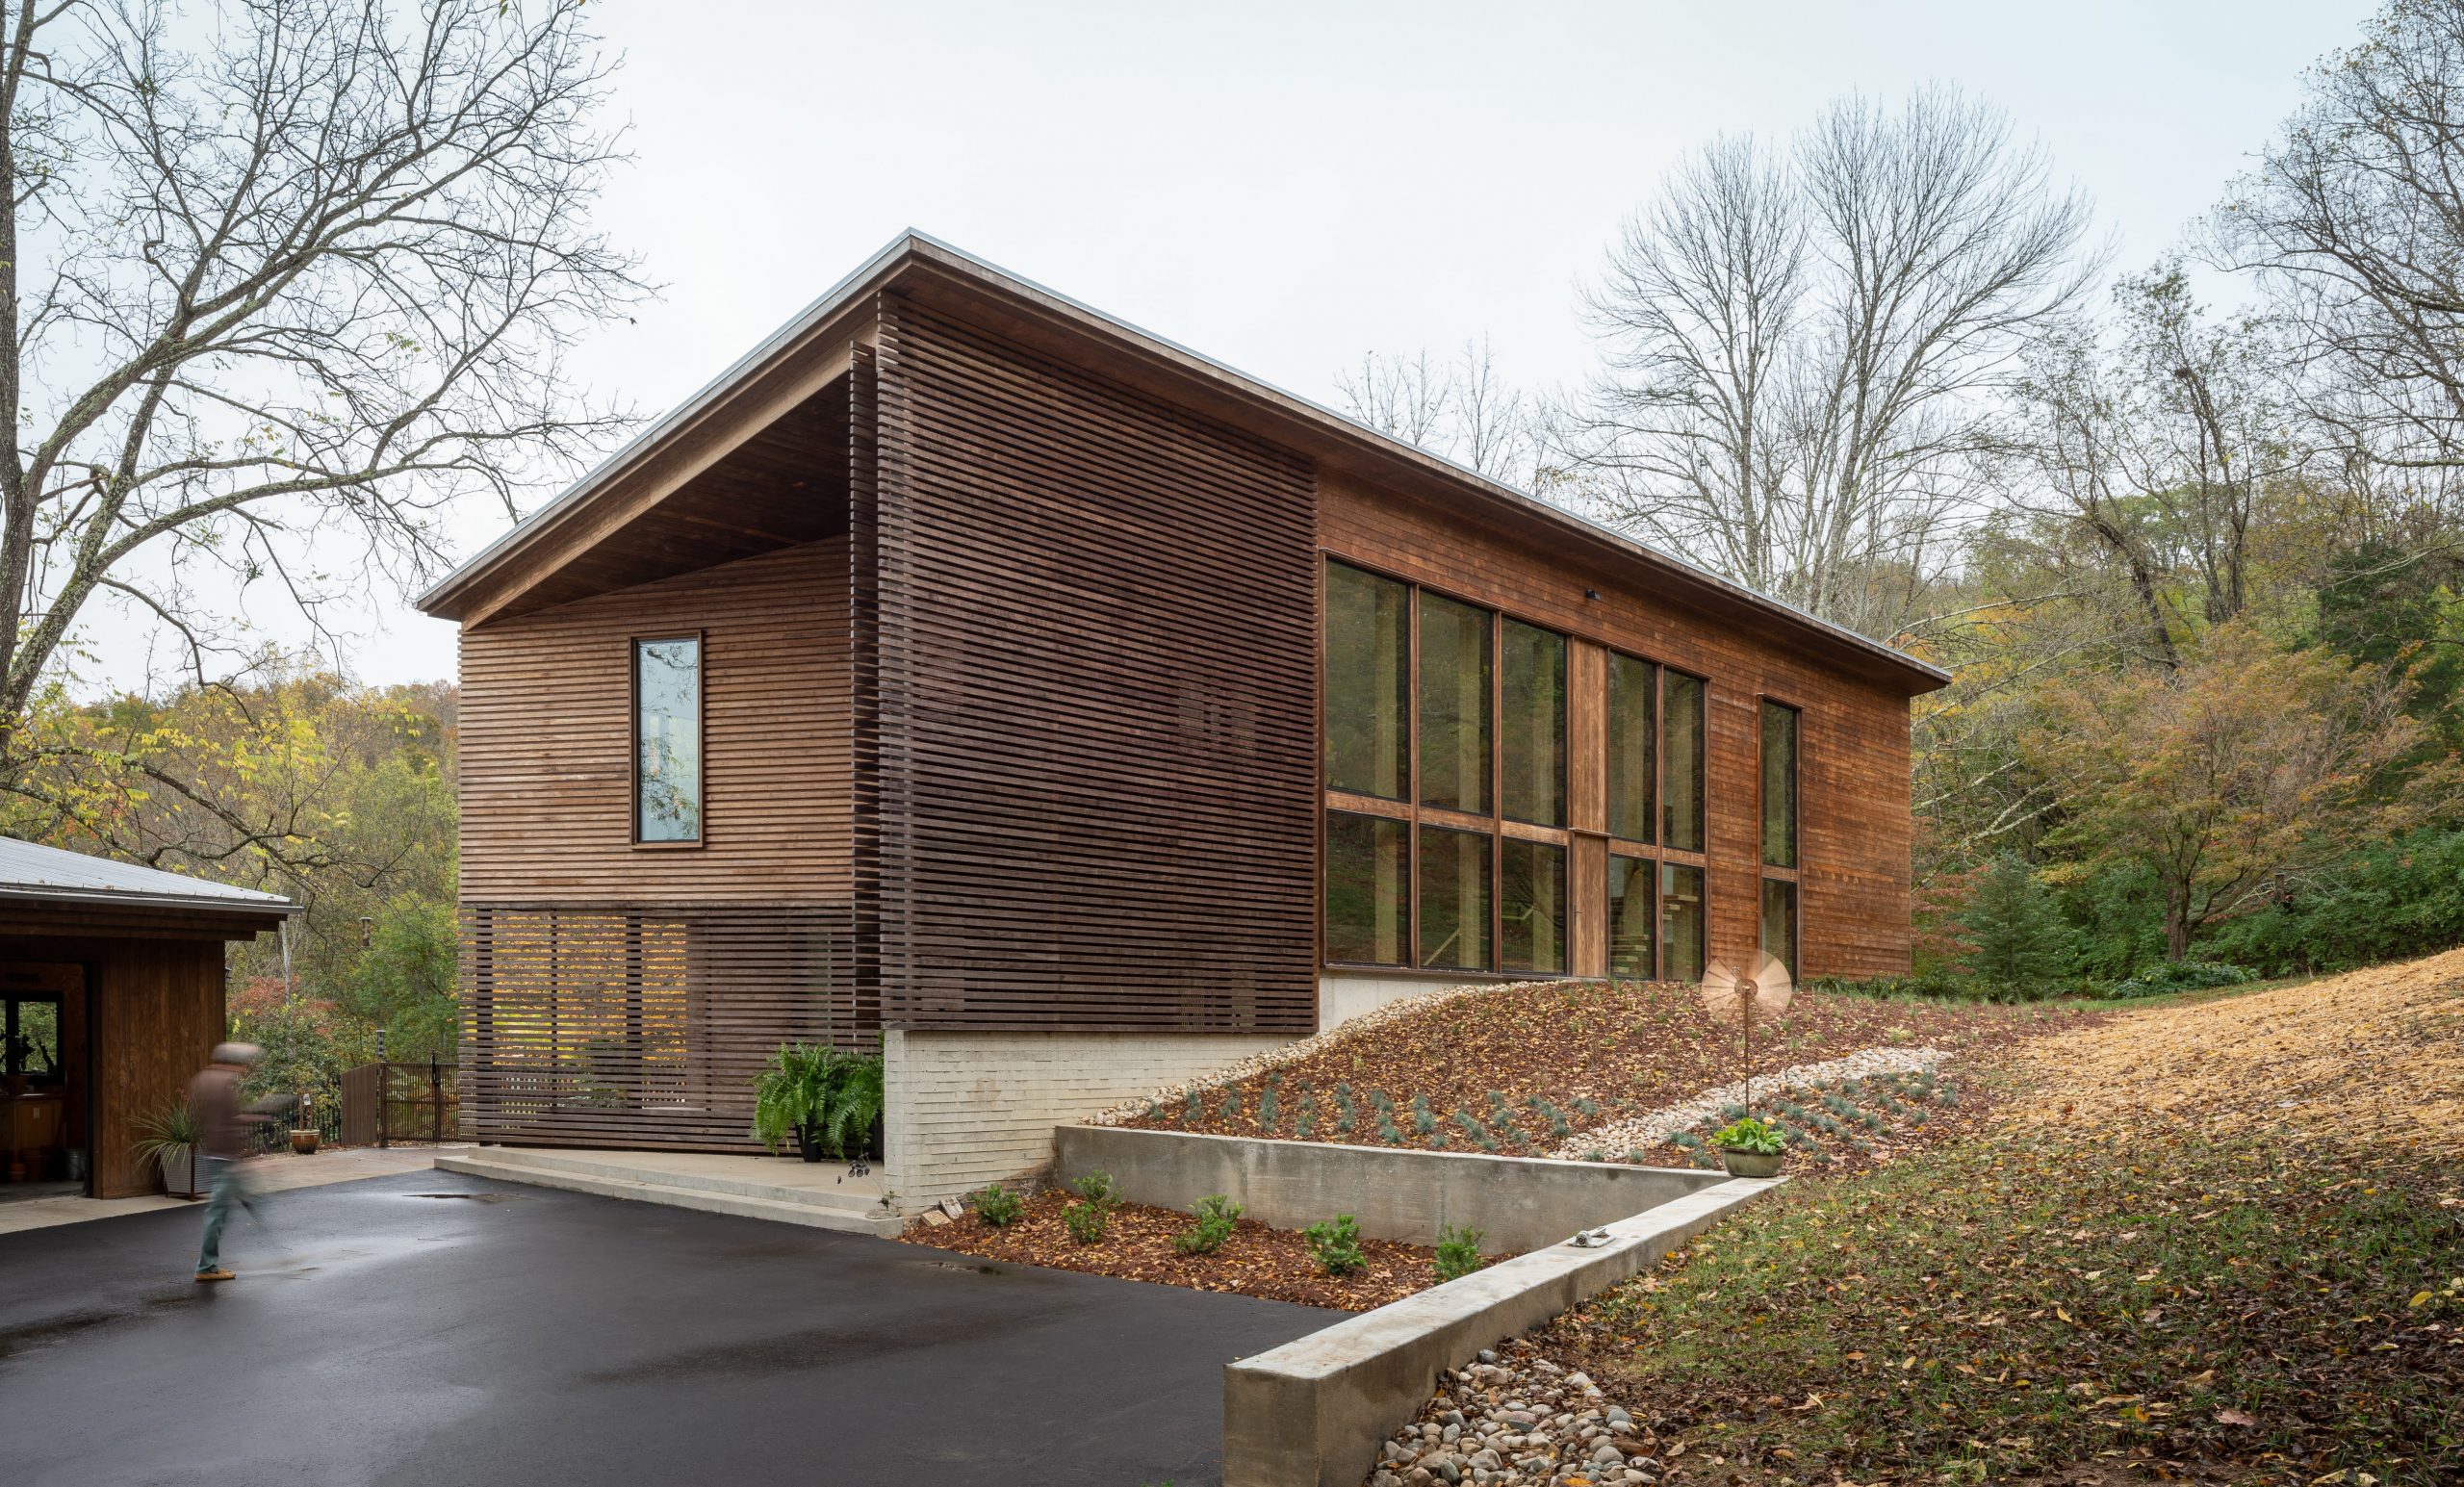 Three-quarter view of the Wood Screen House featuring Kebony Modified Wood Clear Cladding and the driveway in Nashville, Tennessee during an overcast day